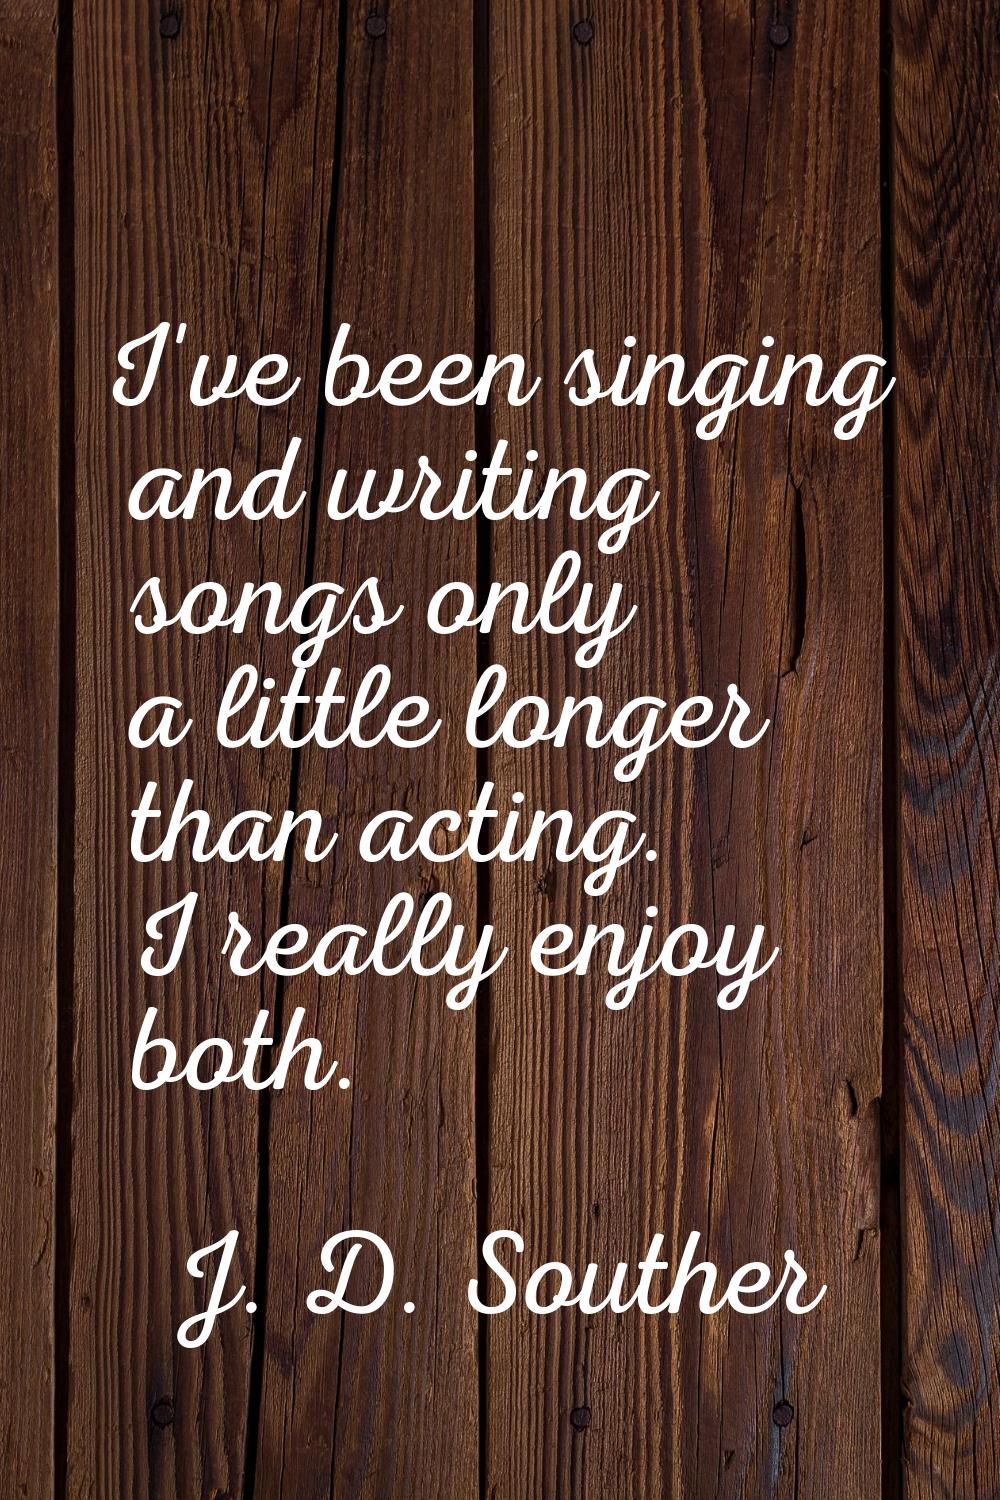 I've been singing and writing songs only a little longer than acting. I really enjoy both.